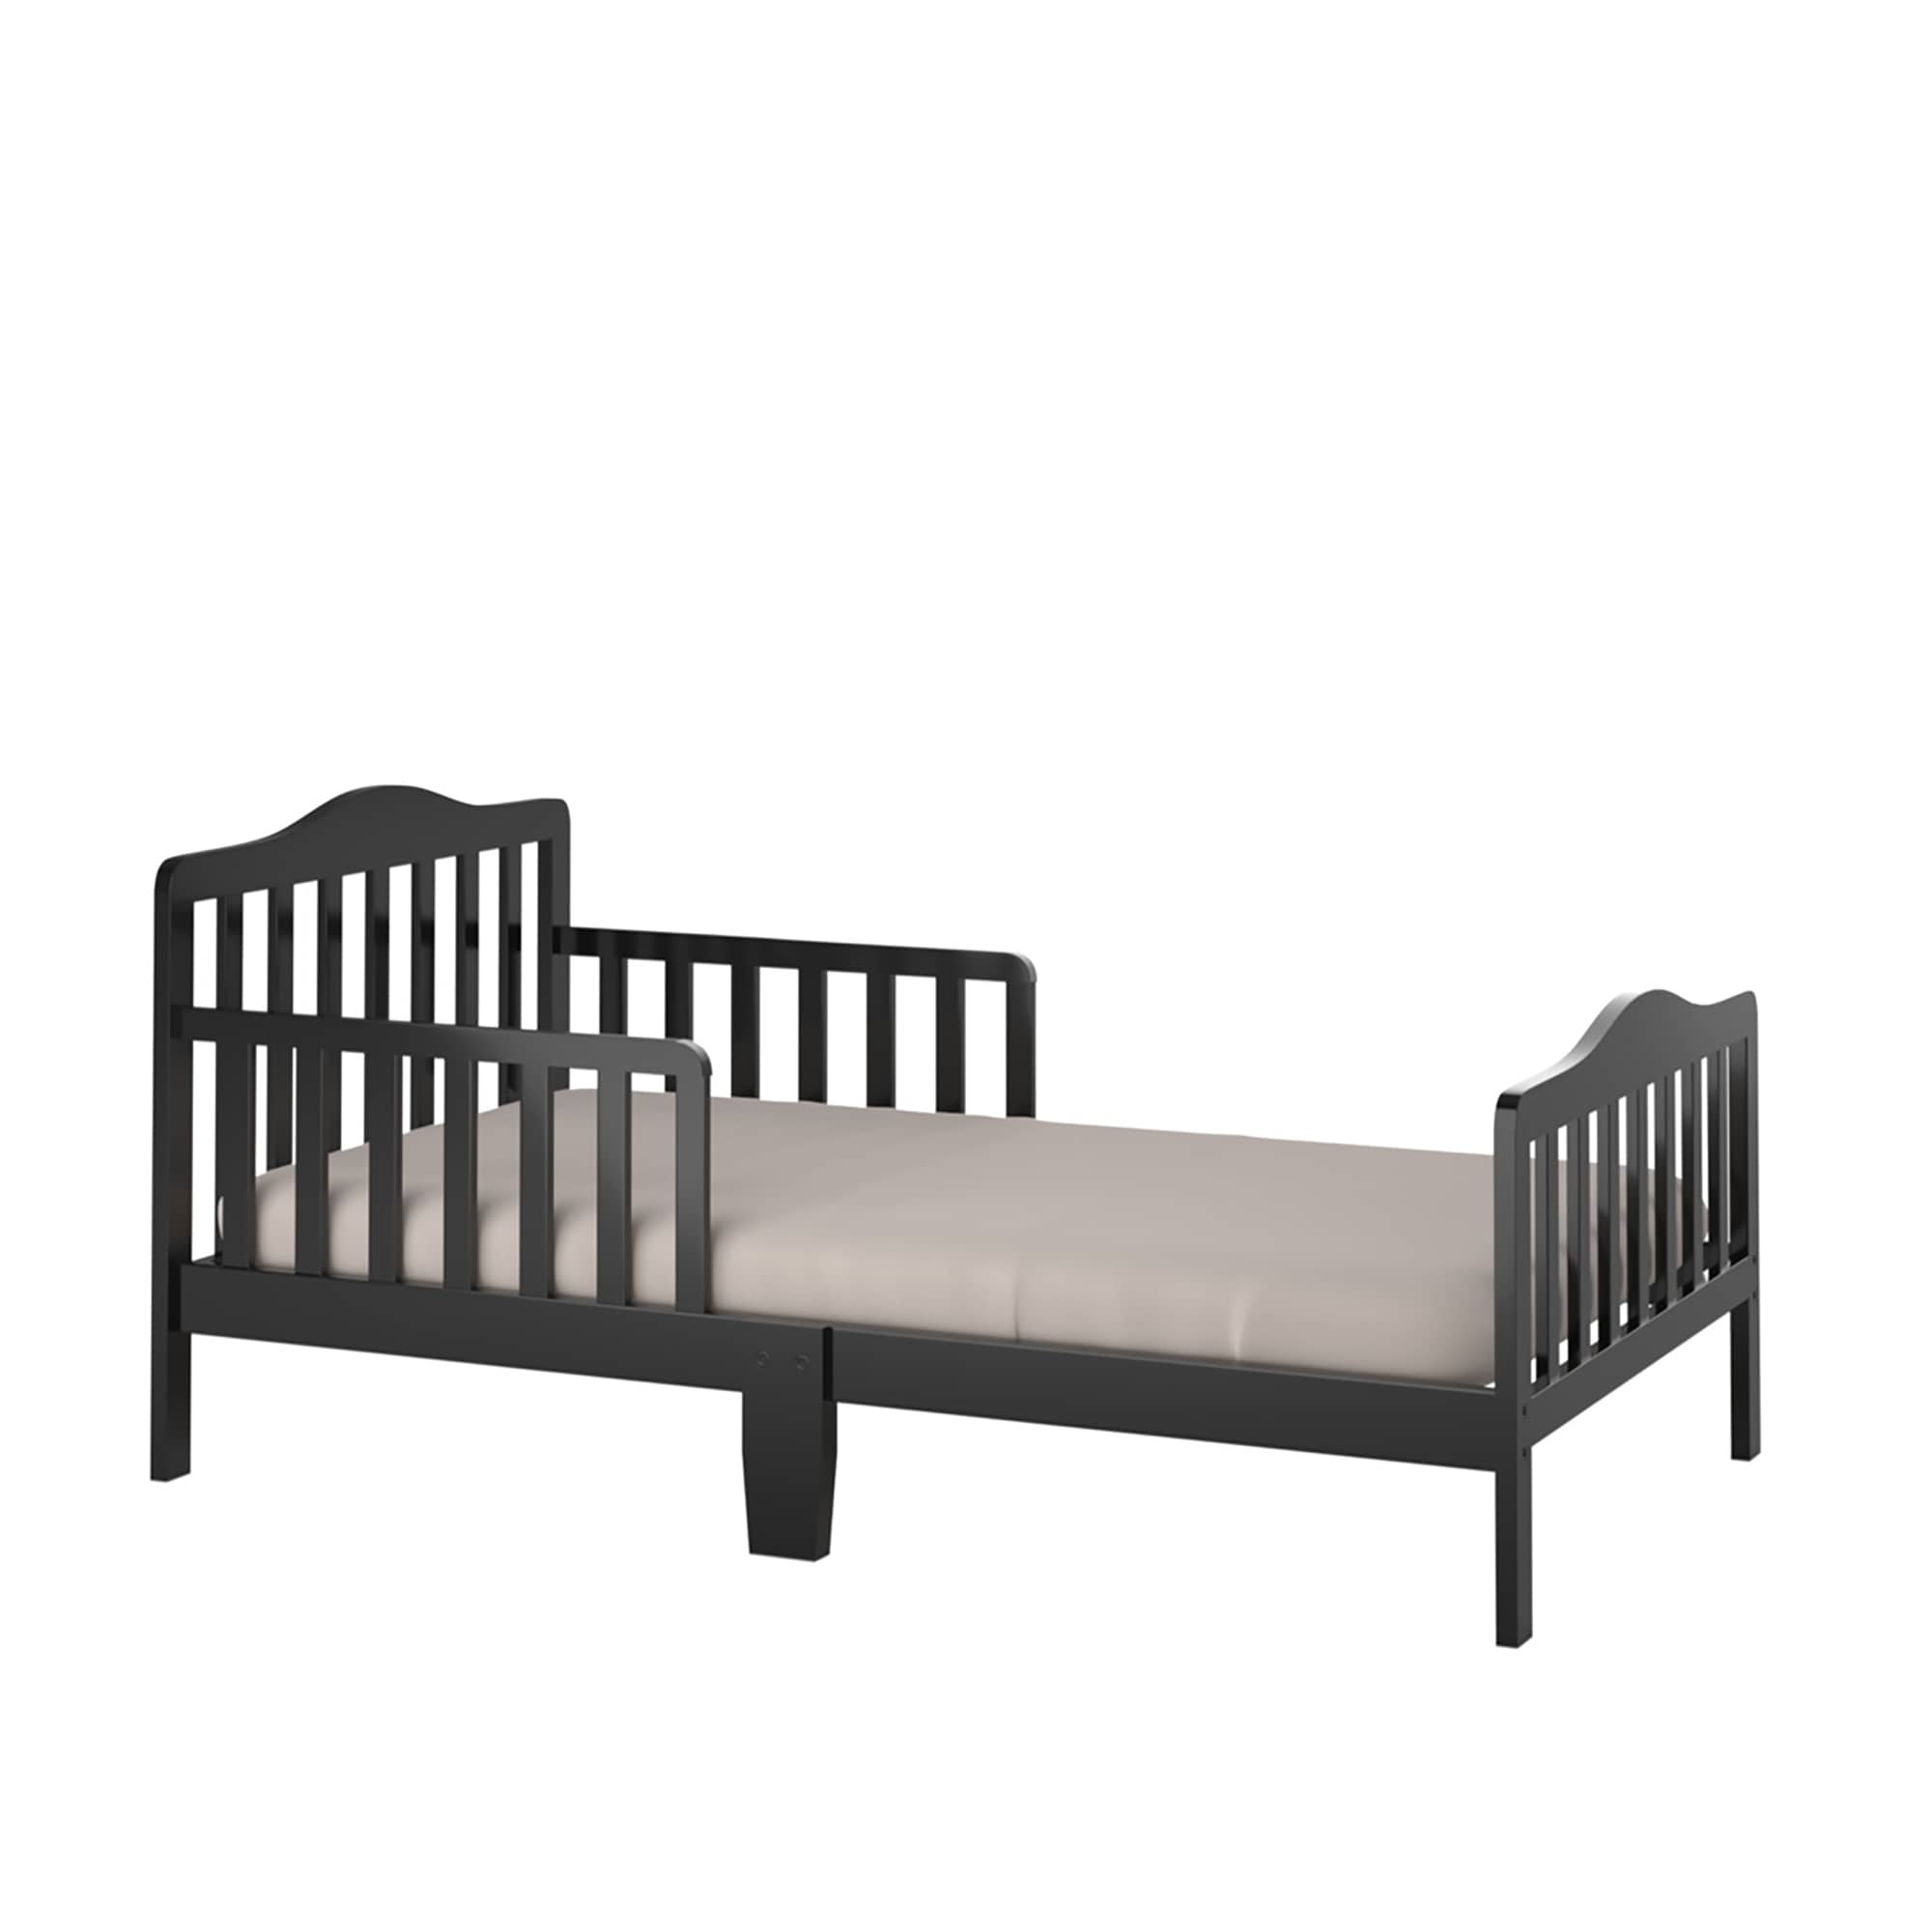 Toddler Bed Classic Design Wood Bed Frame With Two Side Guardrails Overstock 31747563